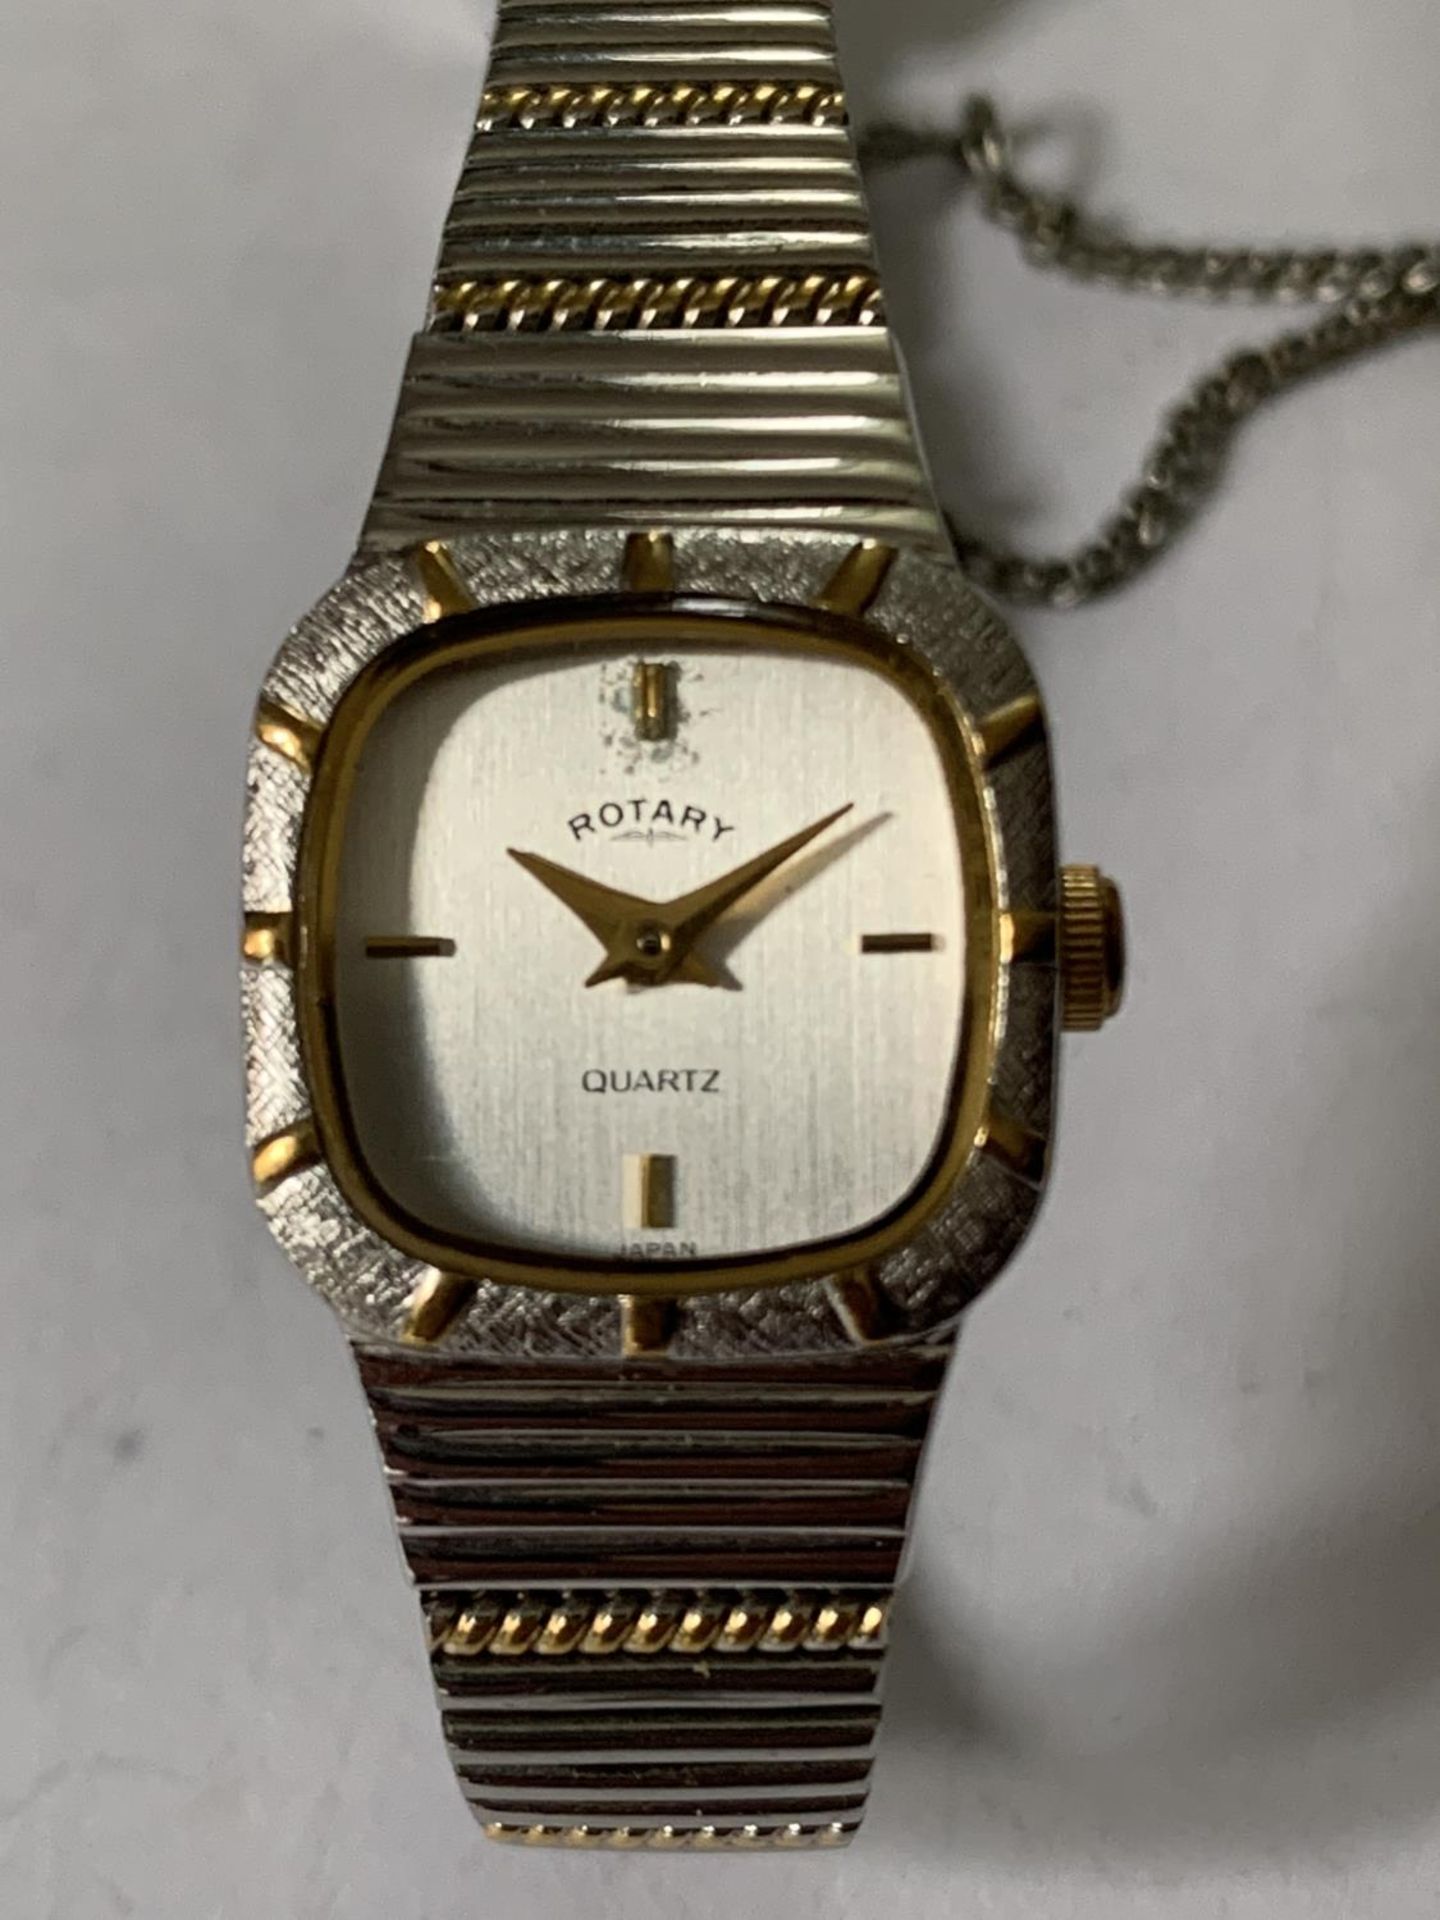 A ROTARY WHITE AND YELLOW METAL STRAP WRIST WATCH IN NEED OF BATTERY - Image 2 of 4